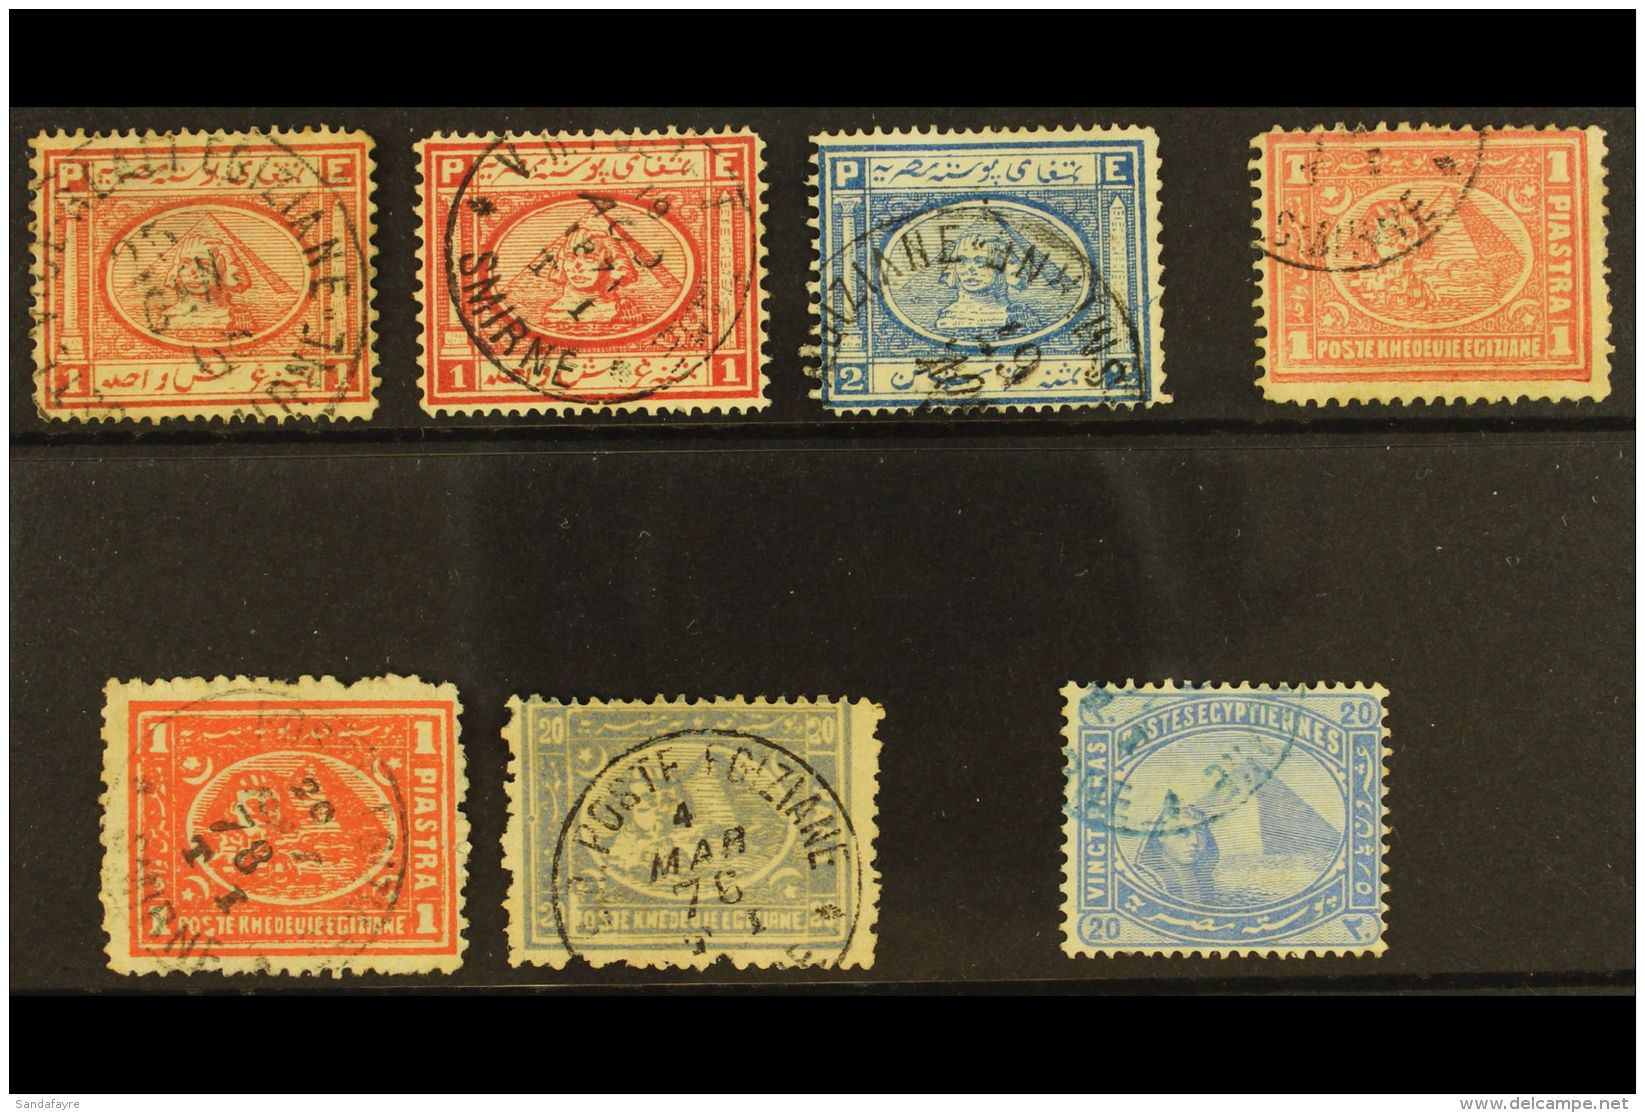 USED AT SMIRNA (TURKEY)  1867 - 1879 Selection Of Pyramid Stamps Cancelled At The Egyptian PO At Smirna. Scarce... - 1866-1914 Ägypten Khediva